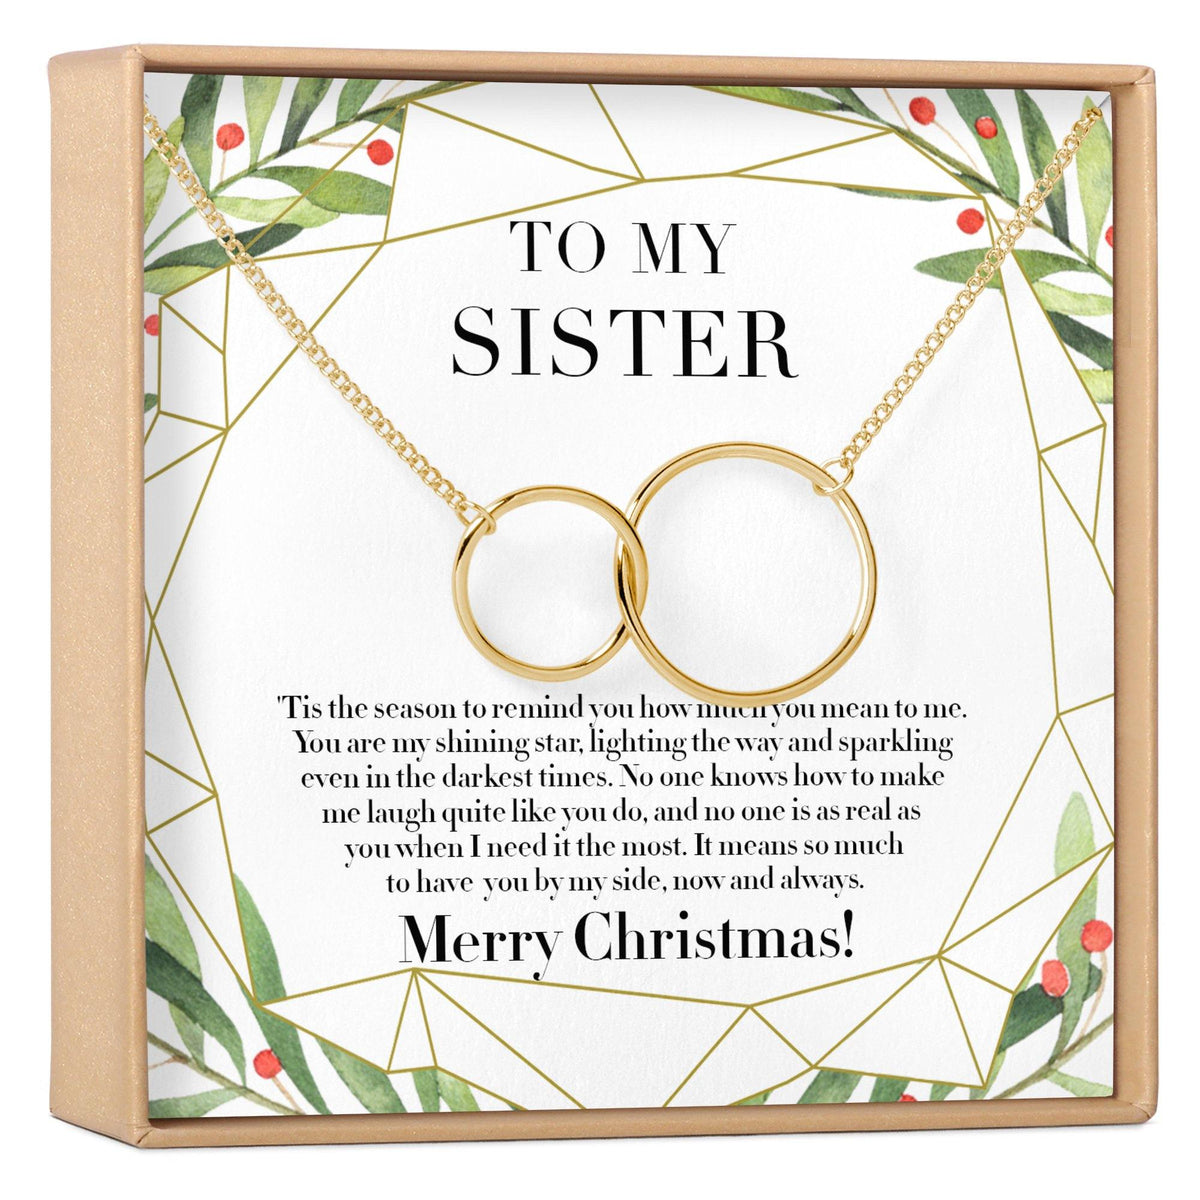 20 Gifts for Sisters You'll Want To Keep Yourself - Saving Dollars and Sense